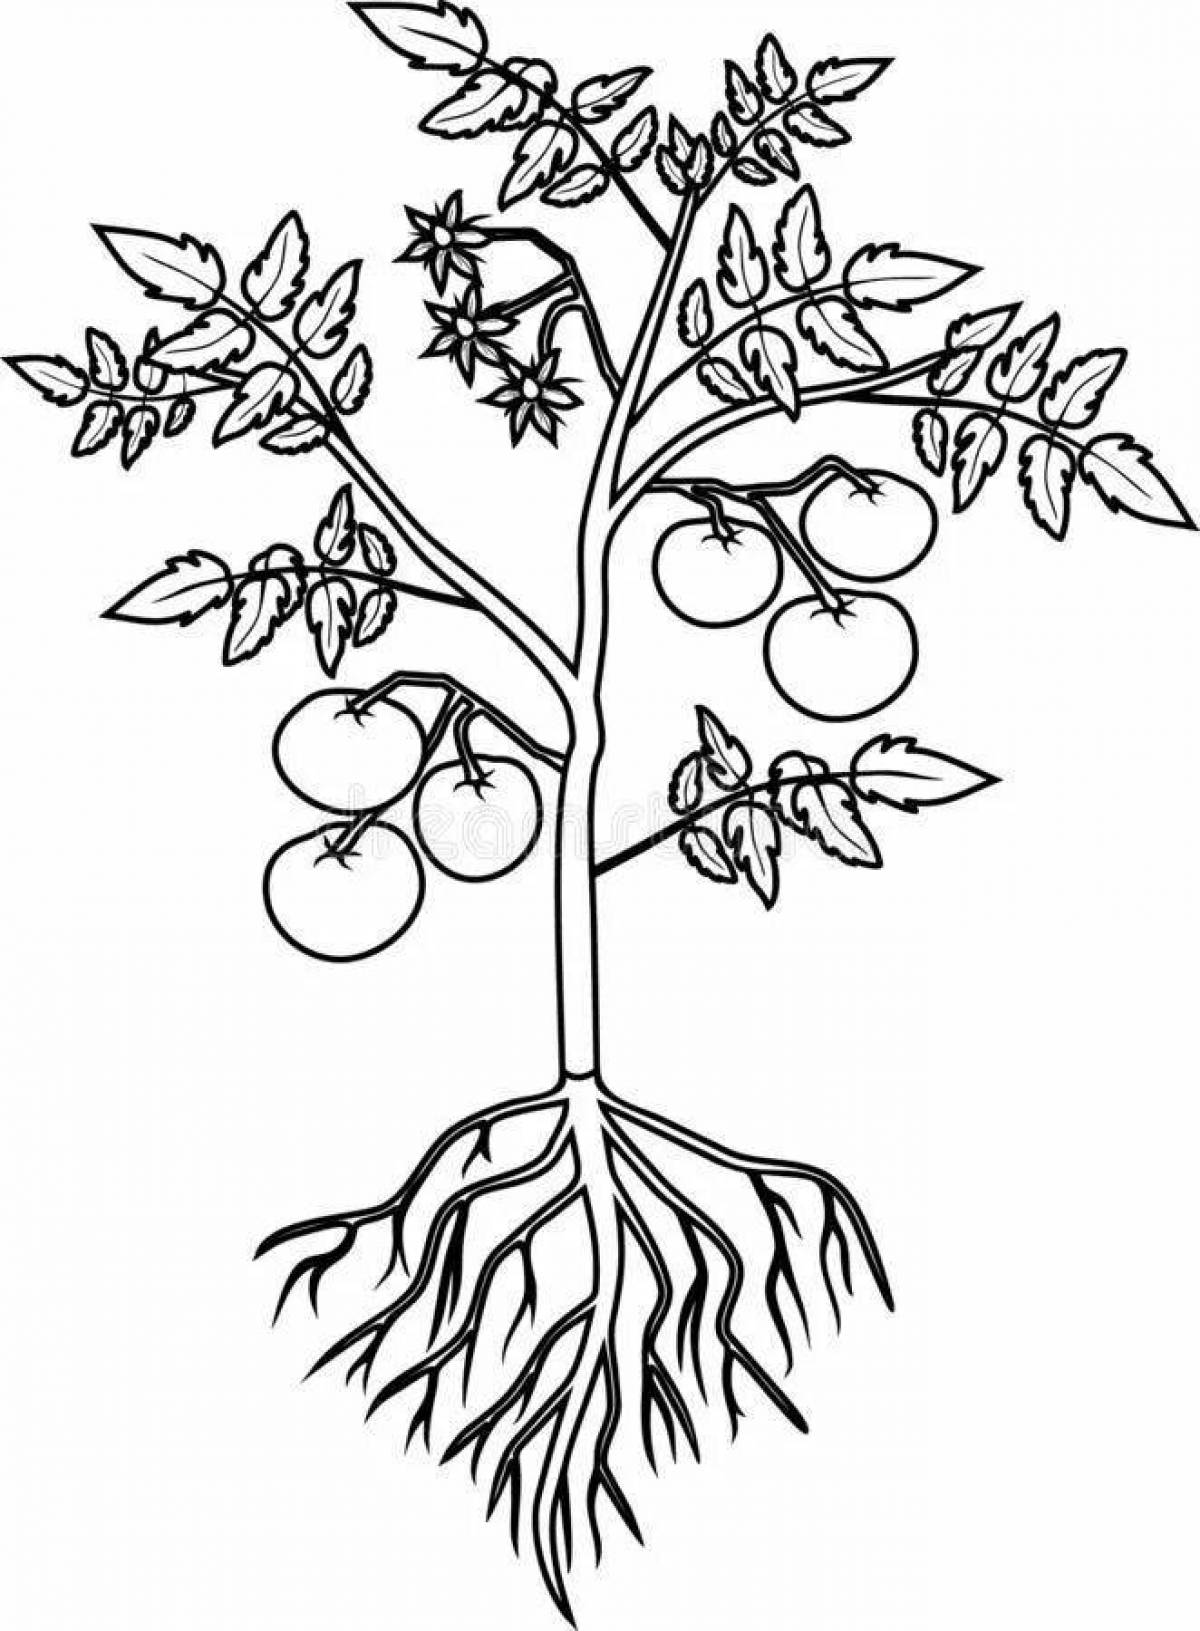 Fun coloring pages of plant parts